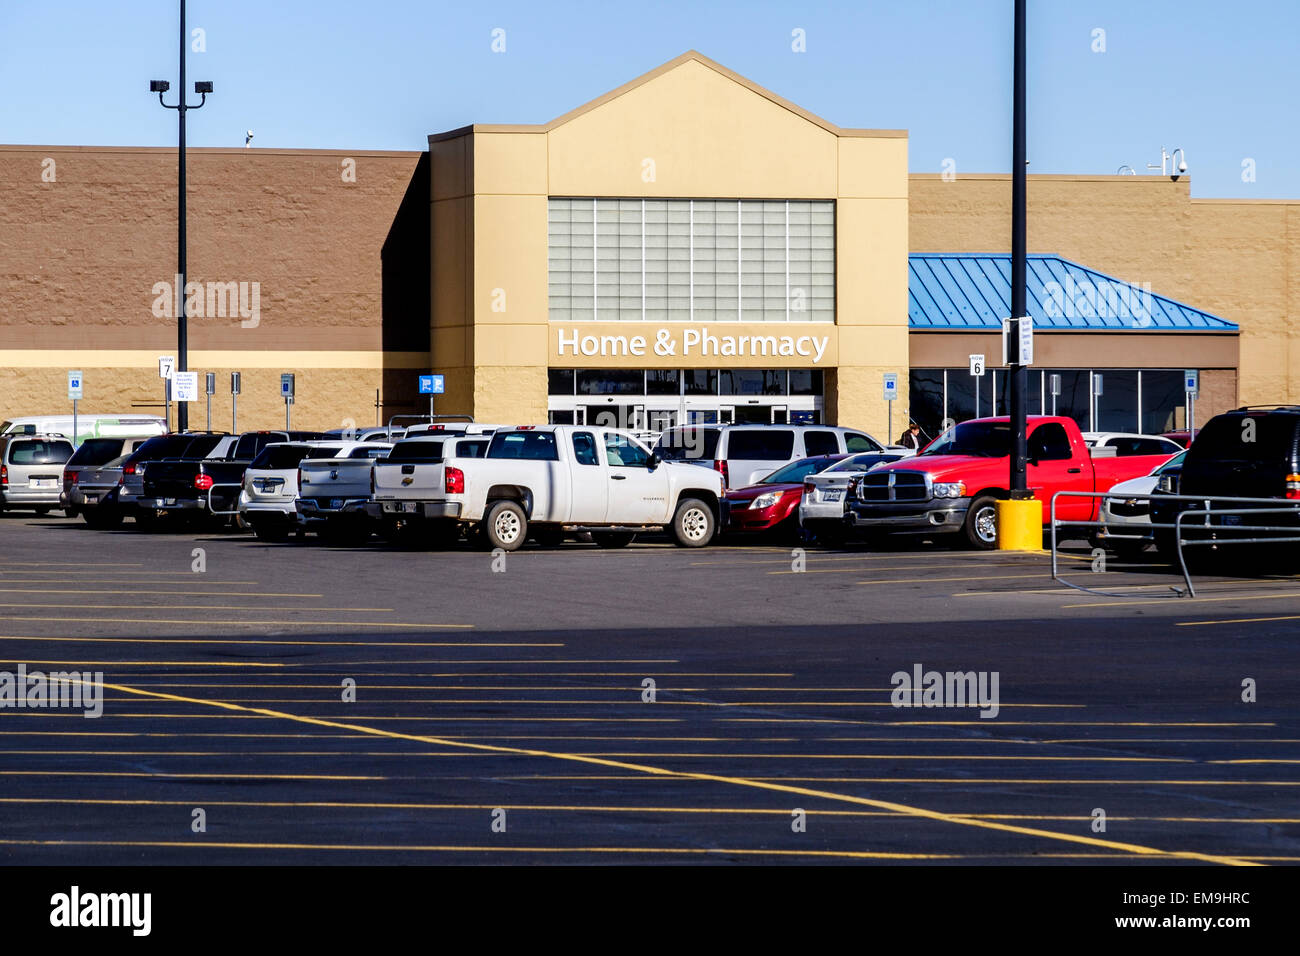 The exterior front of a Walmart store and parking lot in Oklahoma City, Oklahoma, USA. Stock Photo